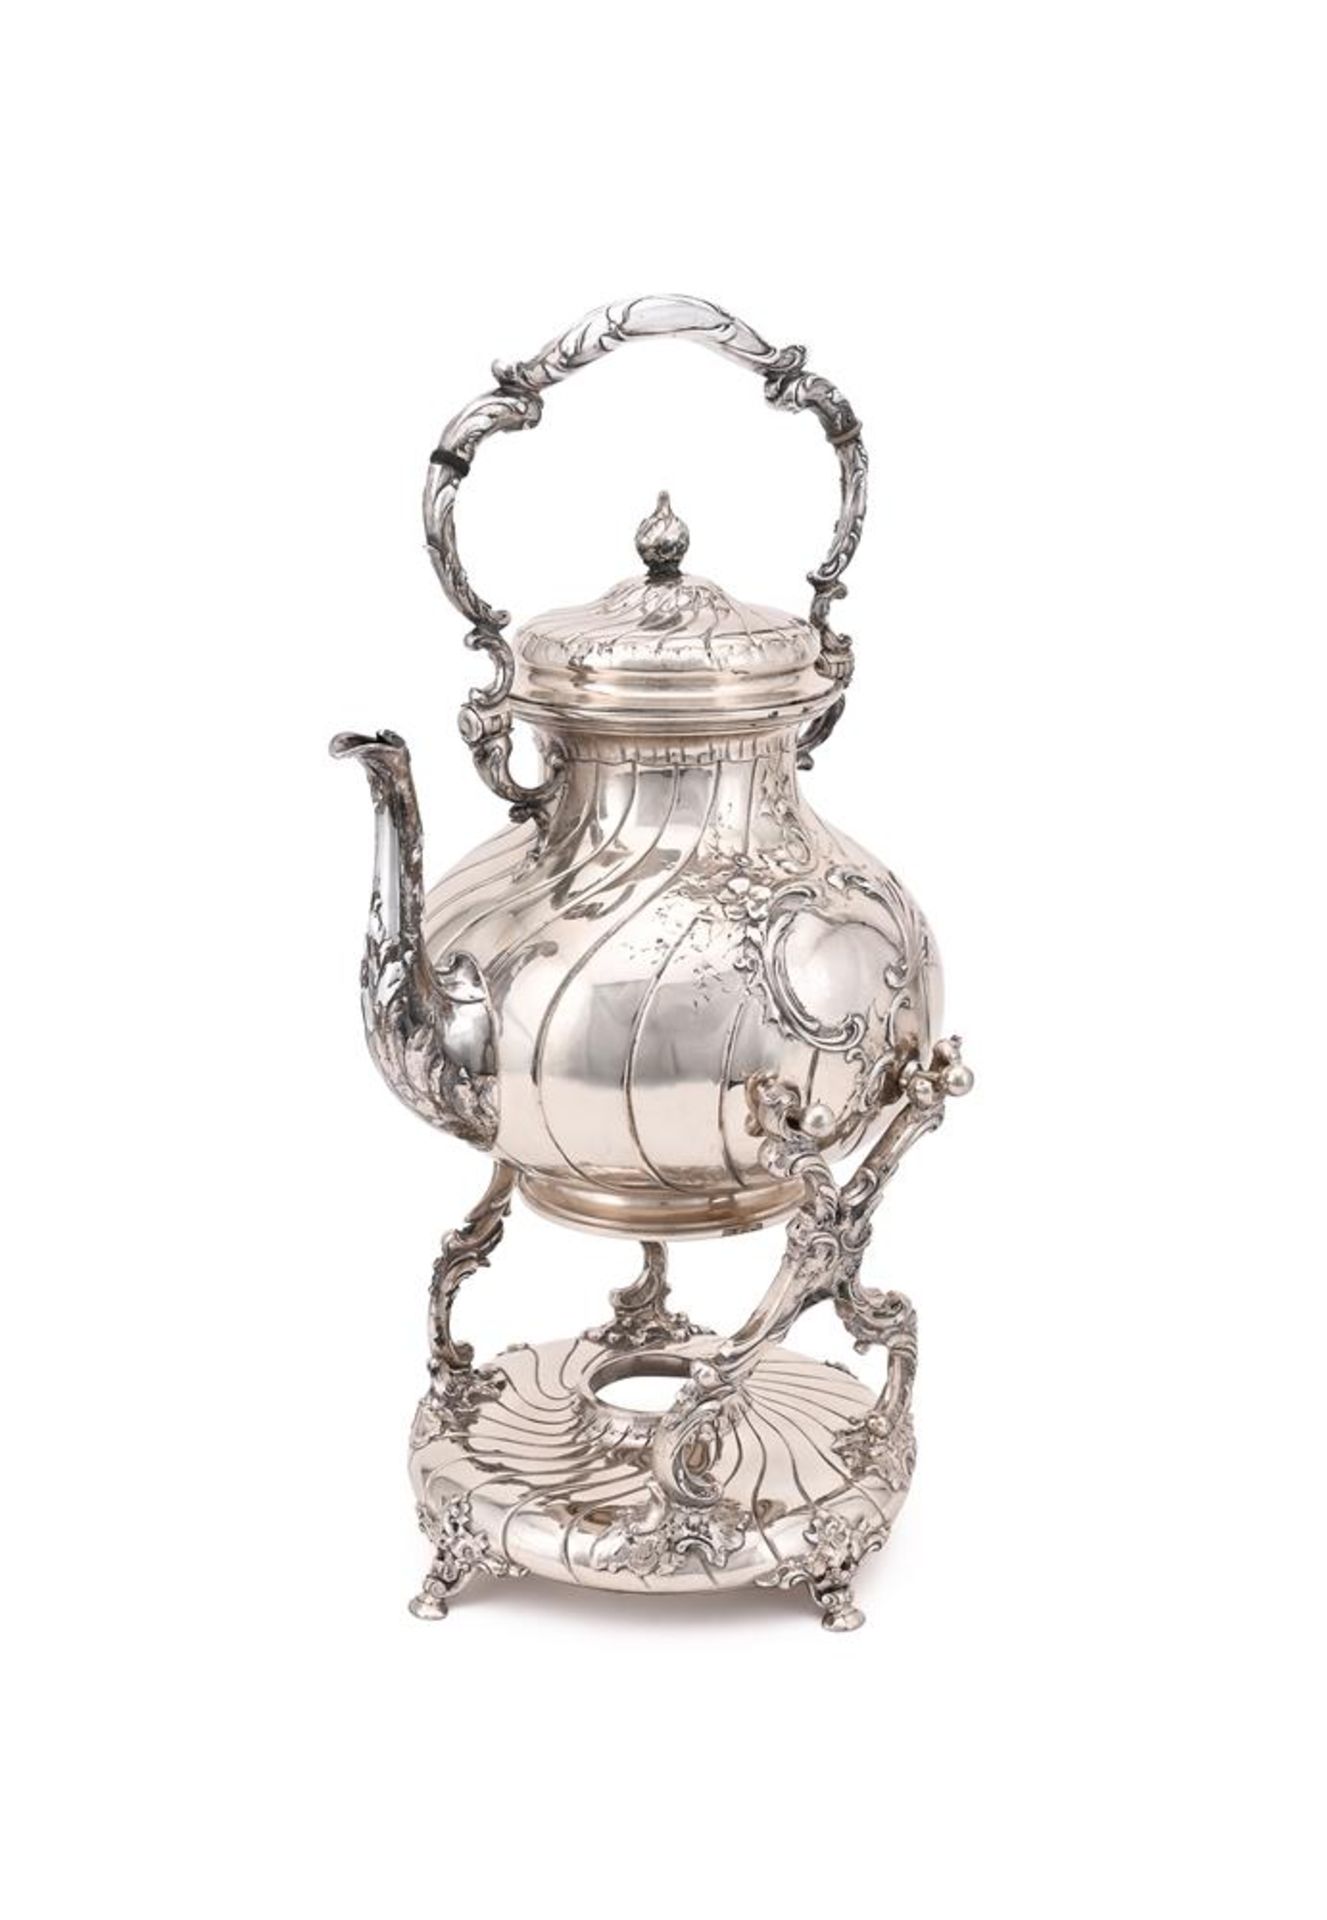 A GERMAN SILVER BALUSTER KETTLE ON AN ASSOCIATED SILVER STAND